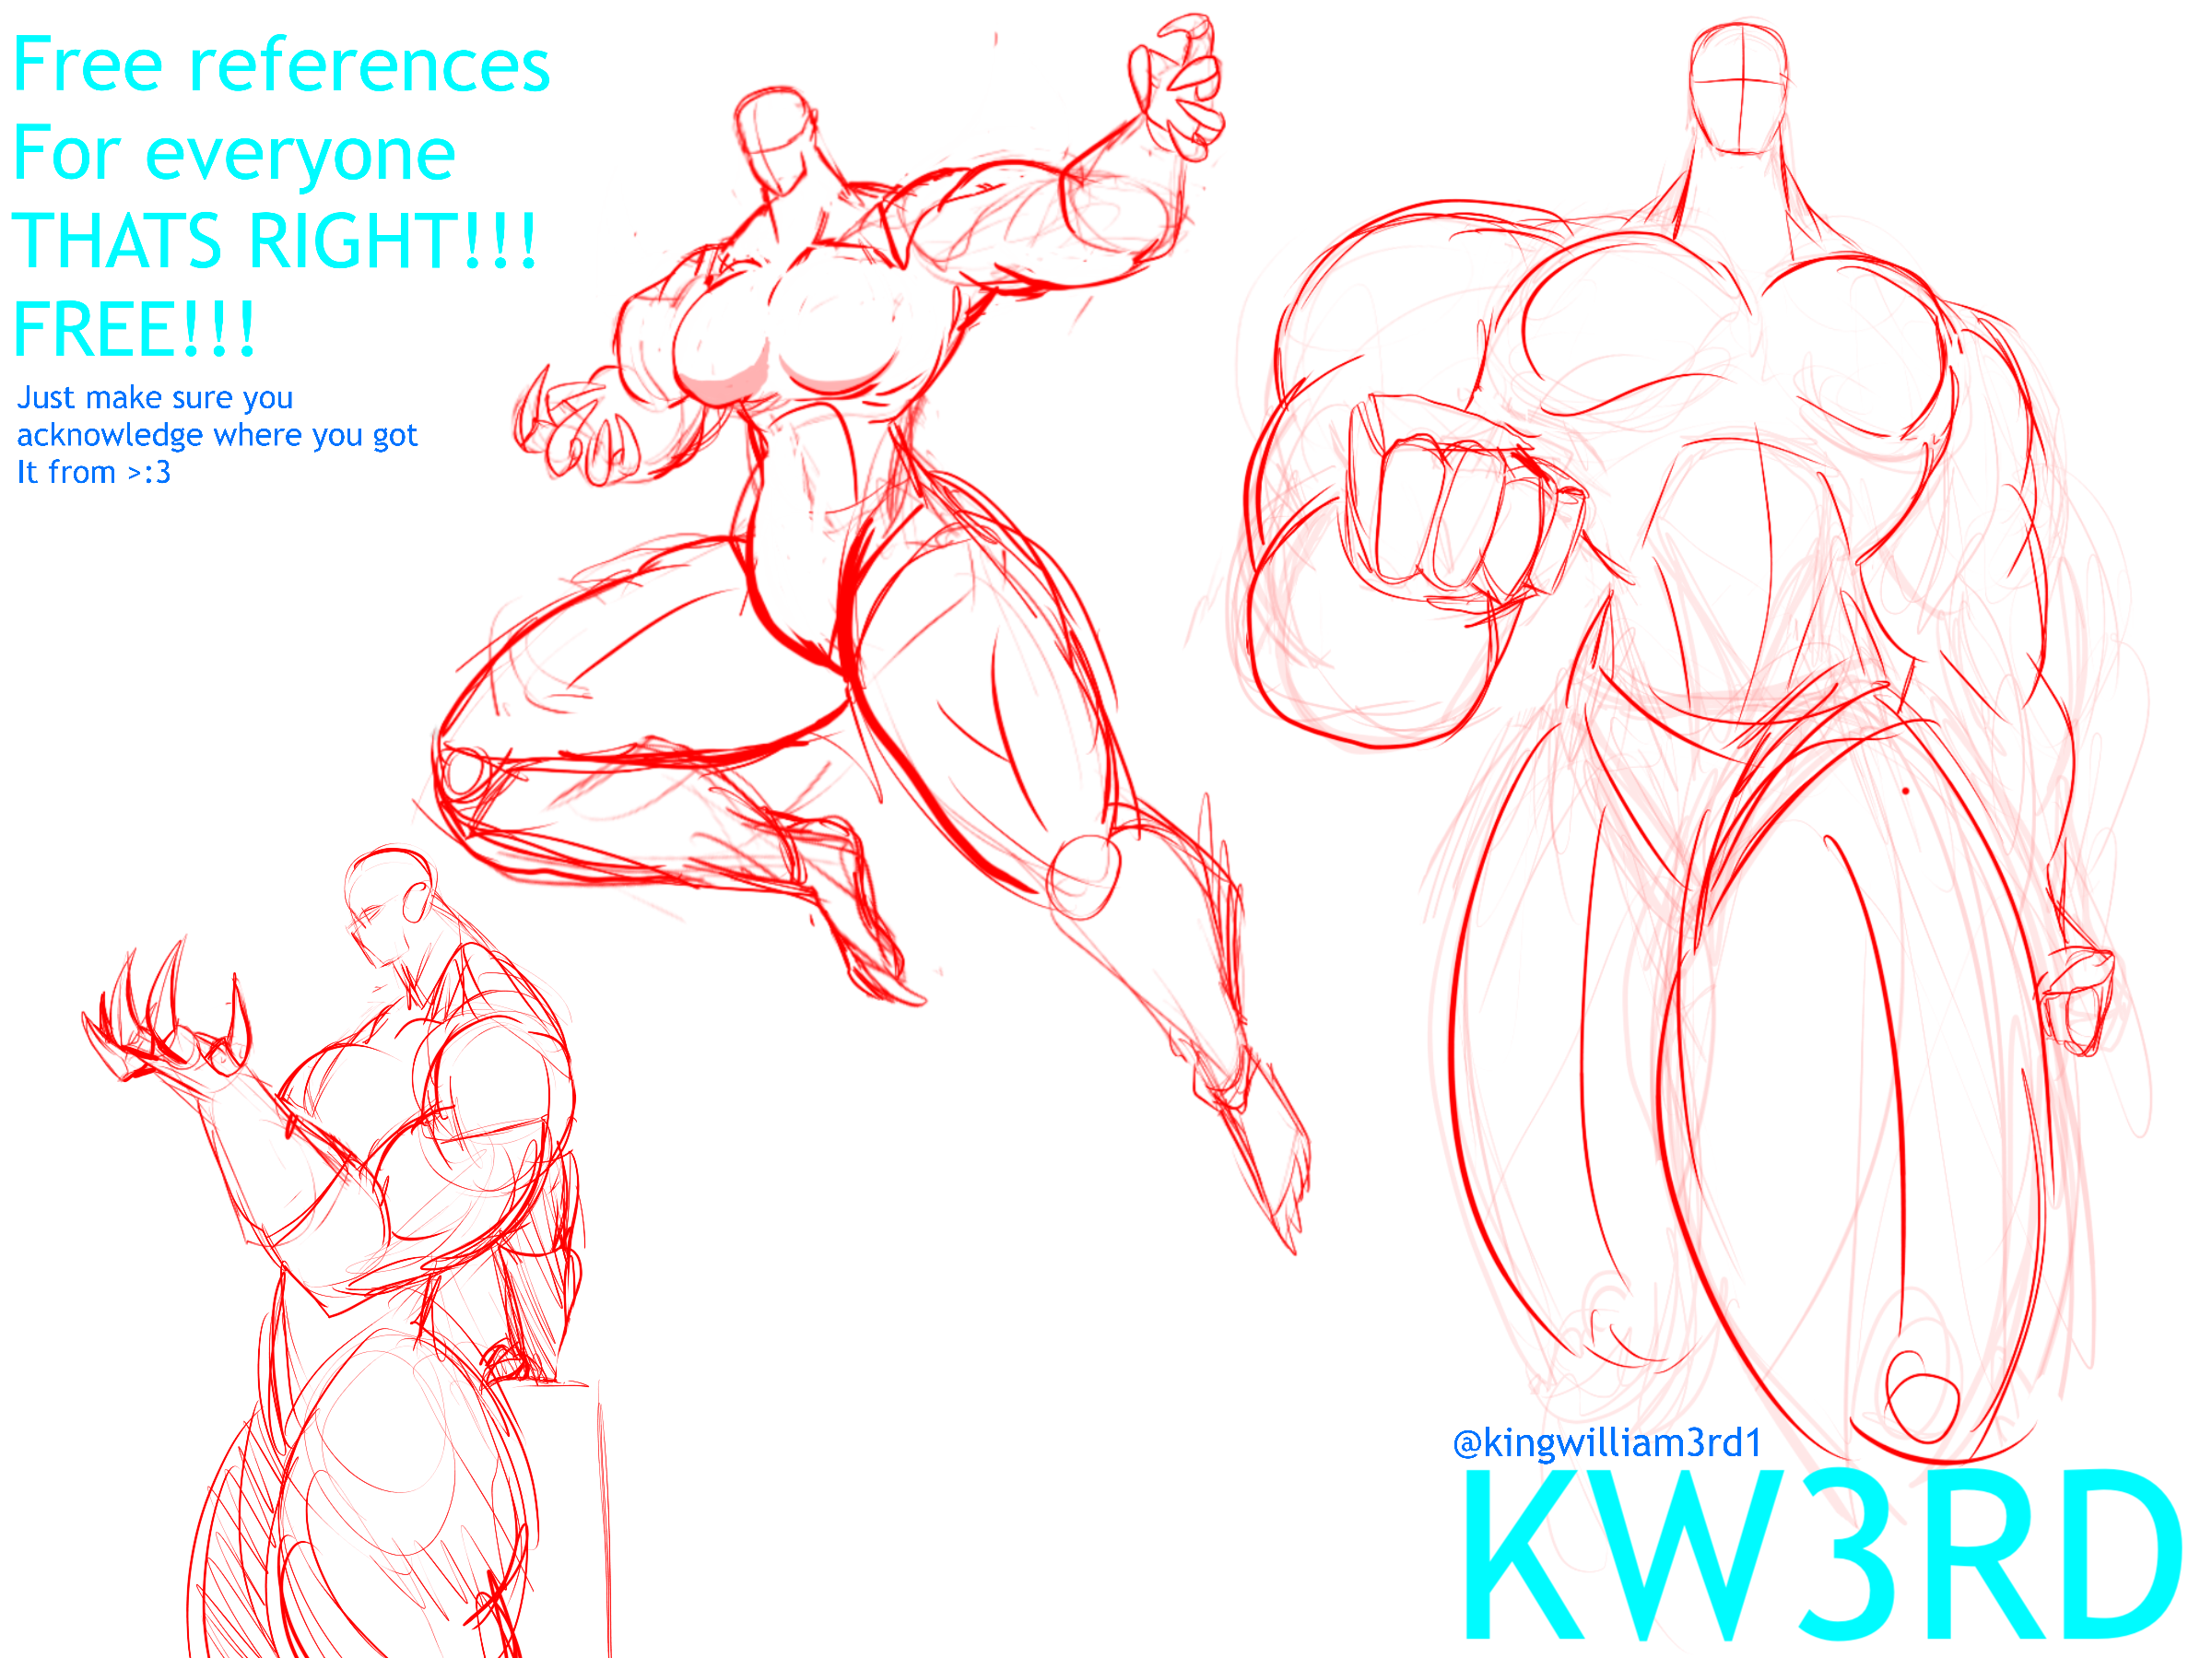 Free references of big beefy gals by Kingwilliam3rd on DeviantArt